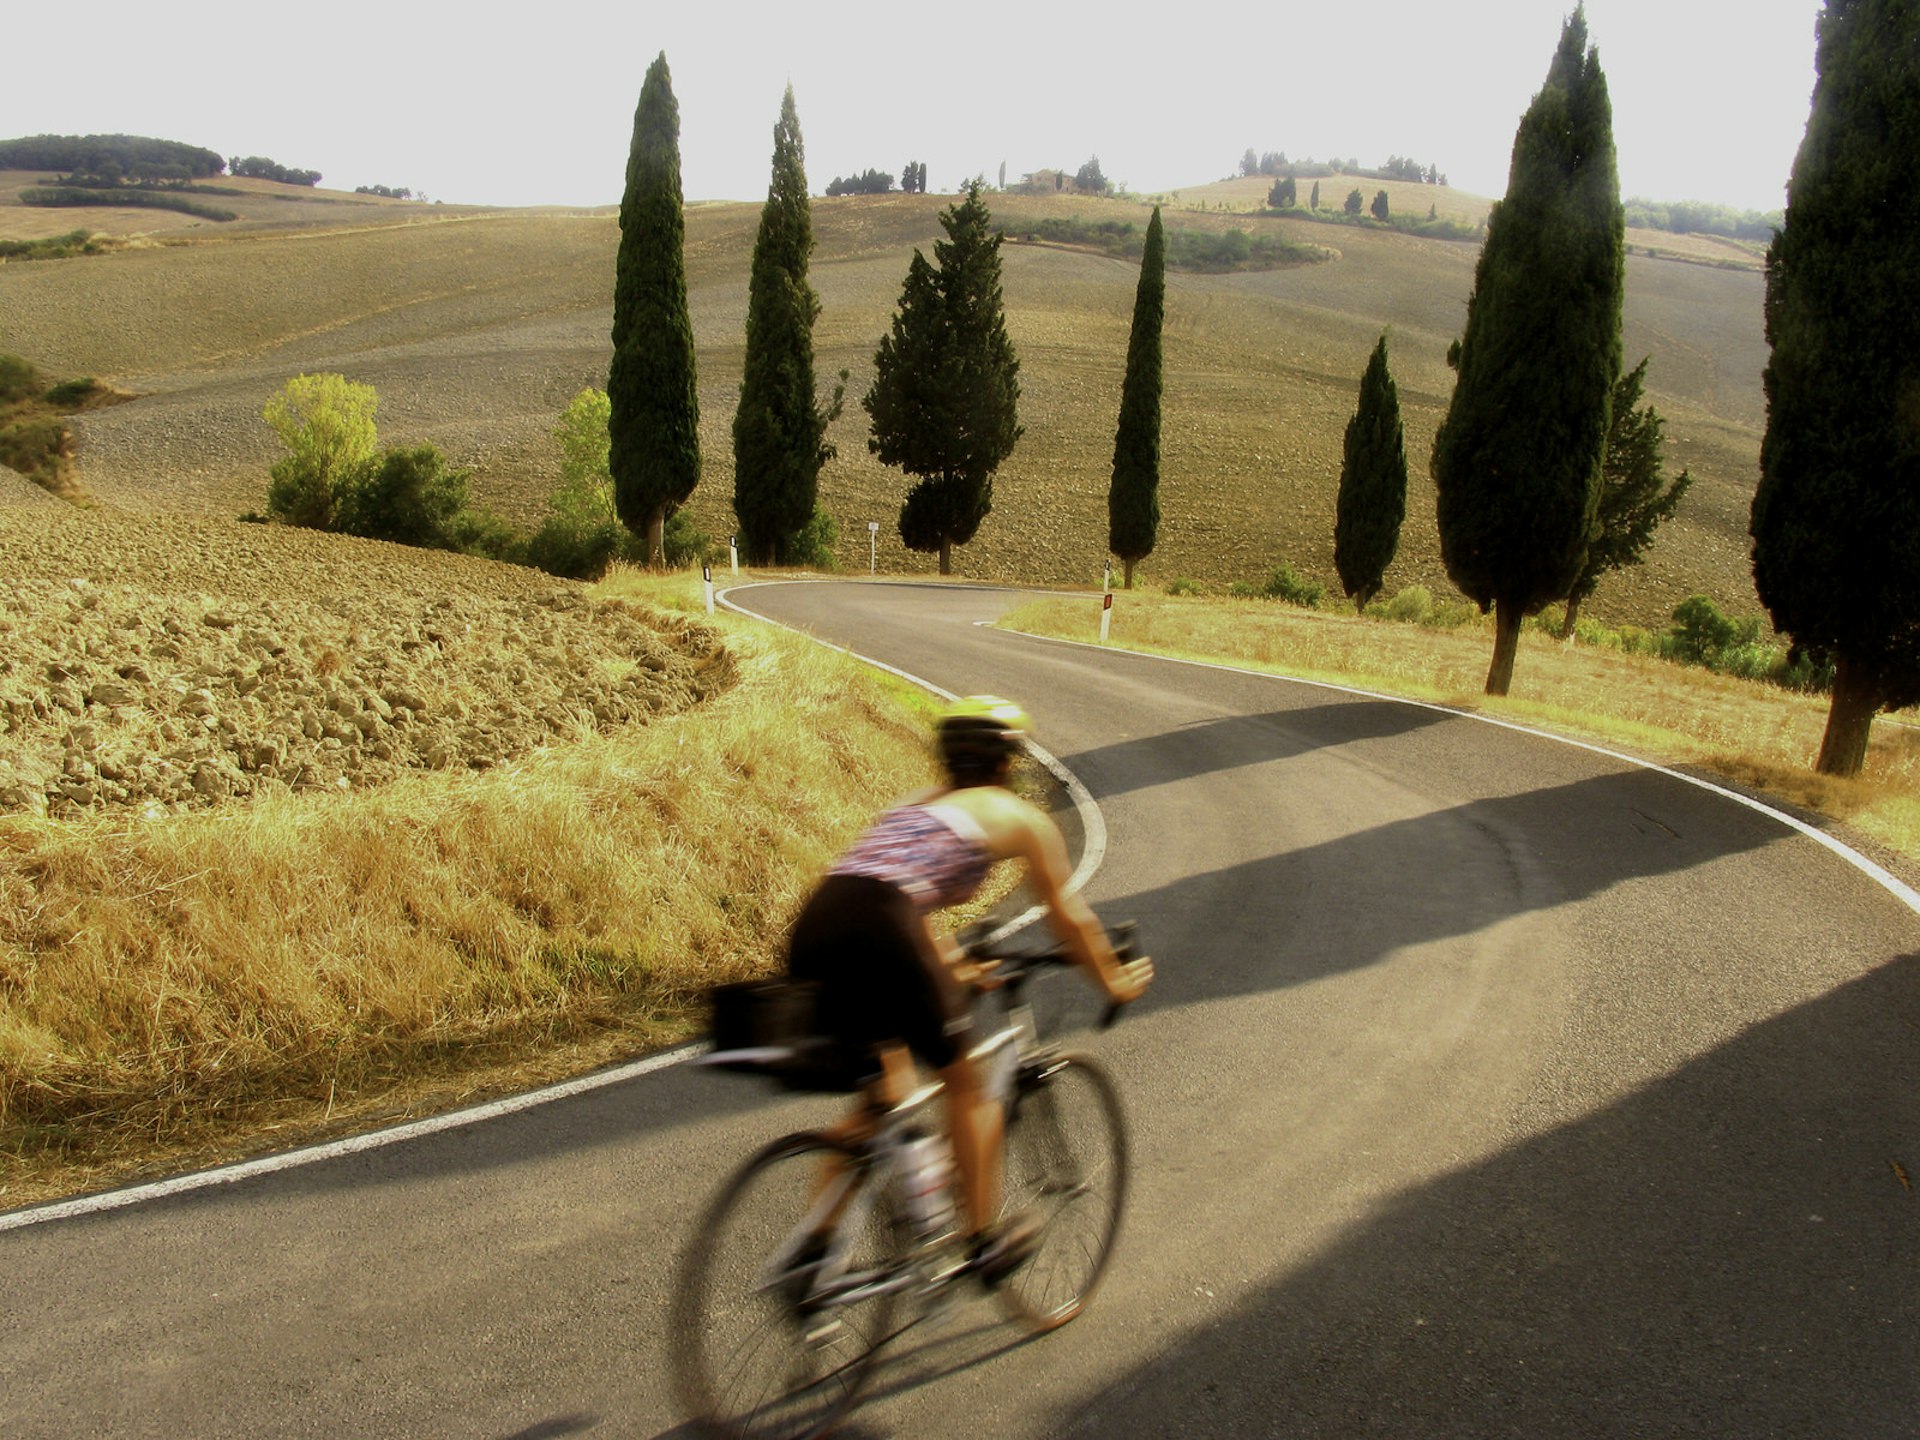 A woman on a bicycle coasts down a hill past wheat fields and cypress trees © David Epperson / Getty Images